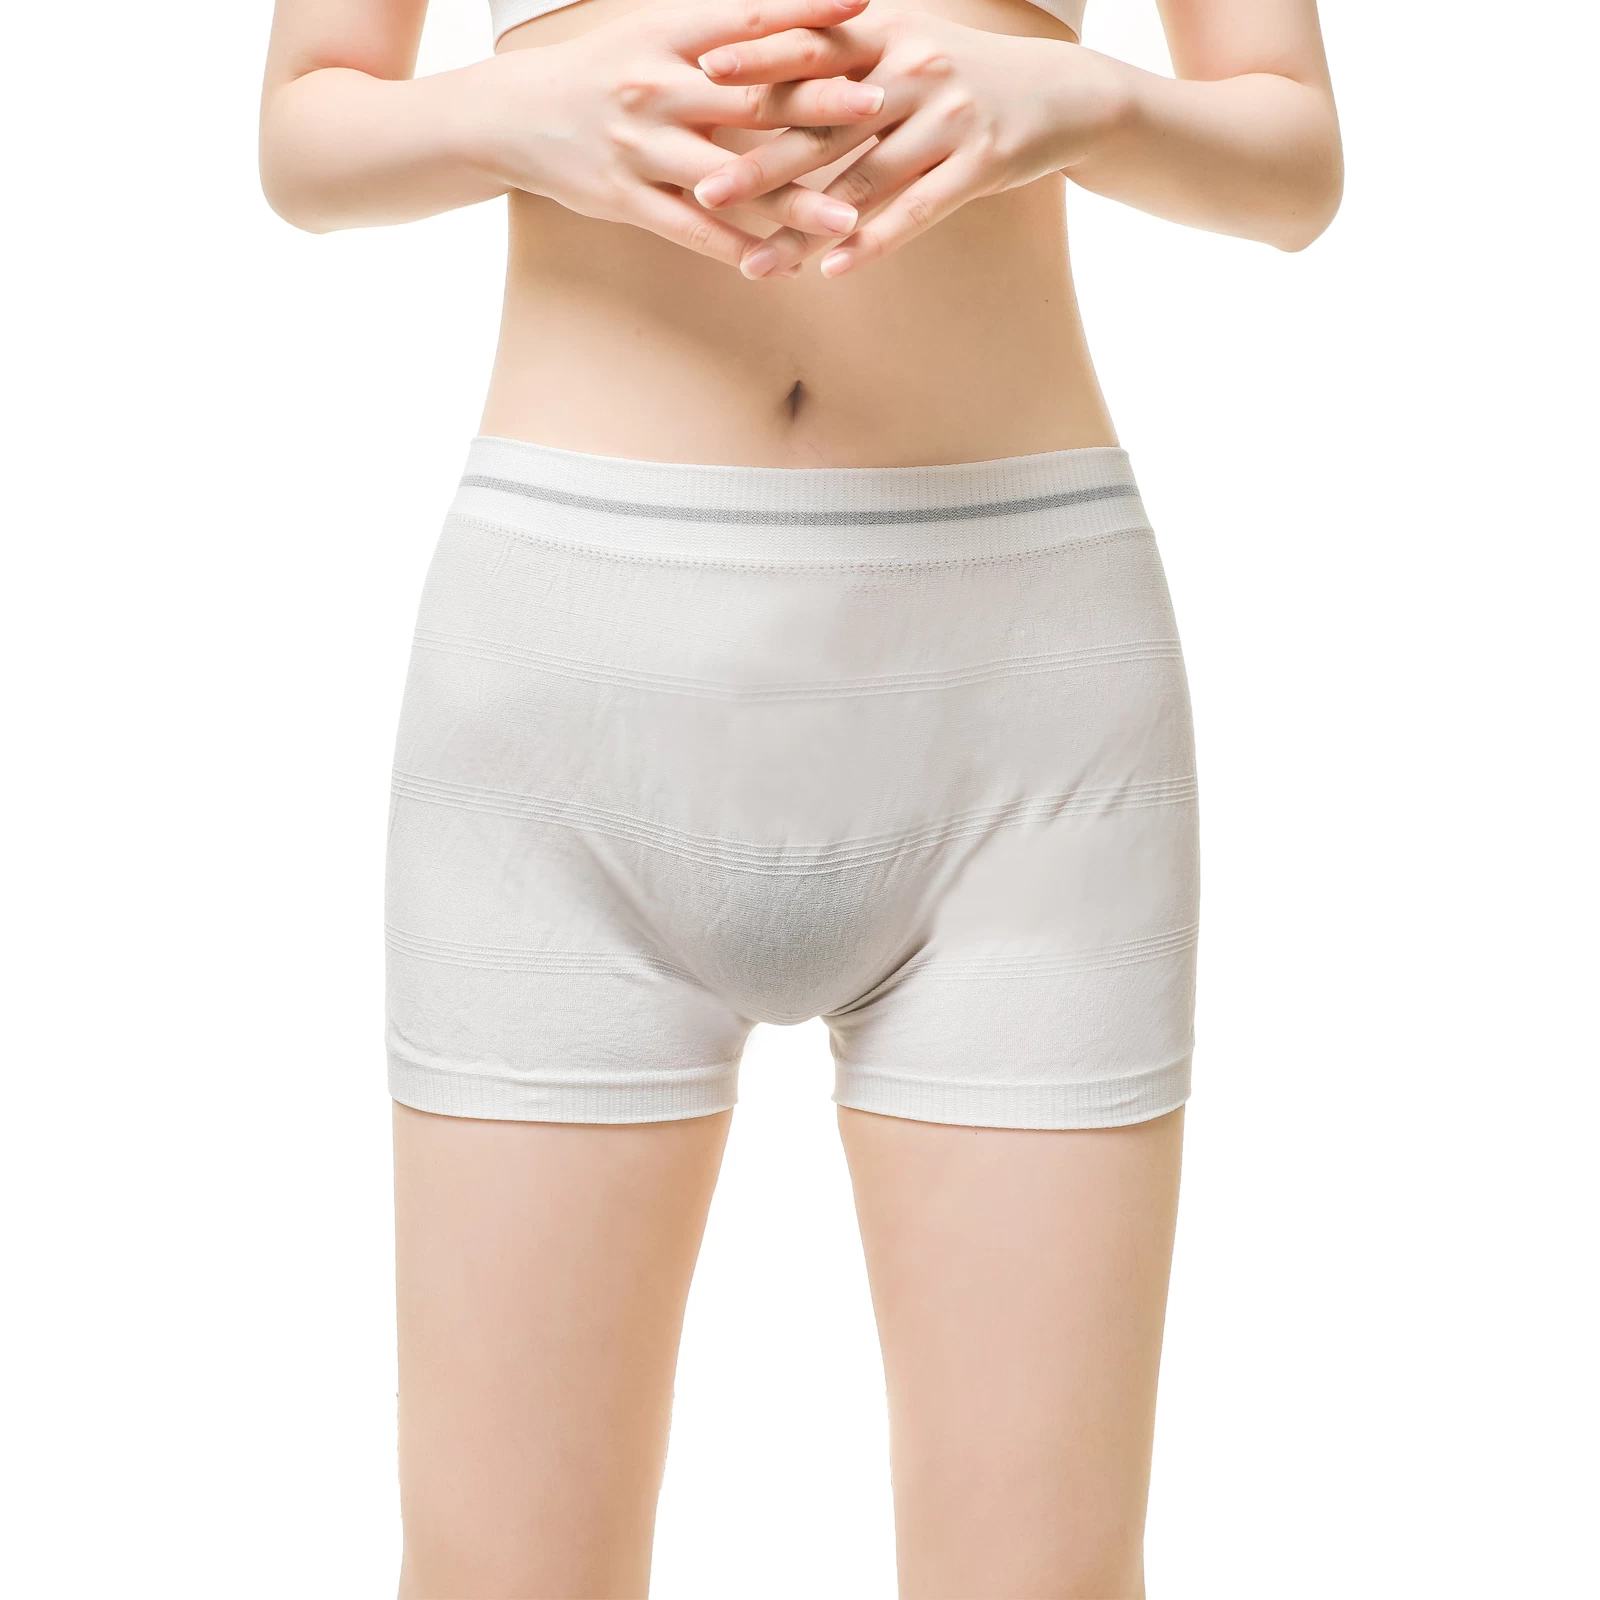 High Quality Washable and Reusable Adult Incontinence Underwear